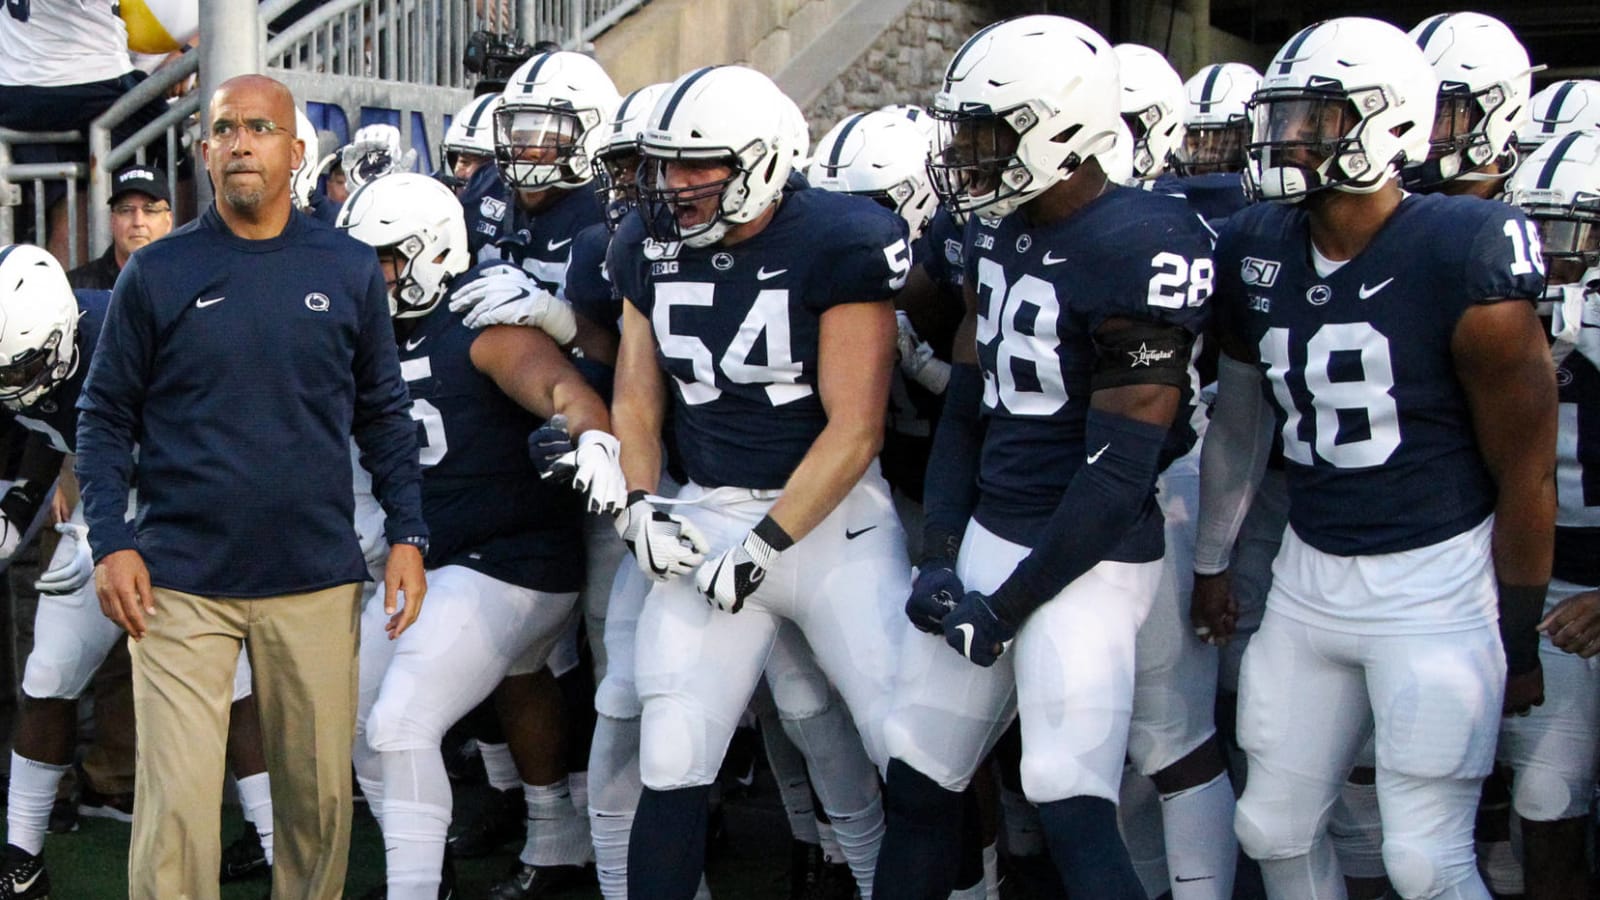 Why demeaning letter to Penn State player doesn't stun me